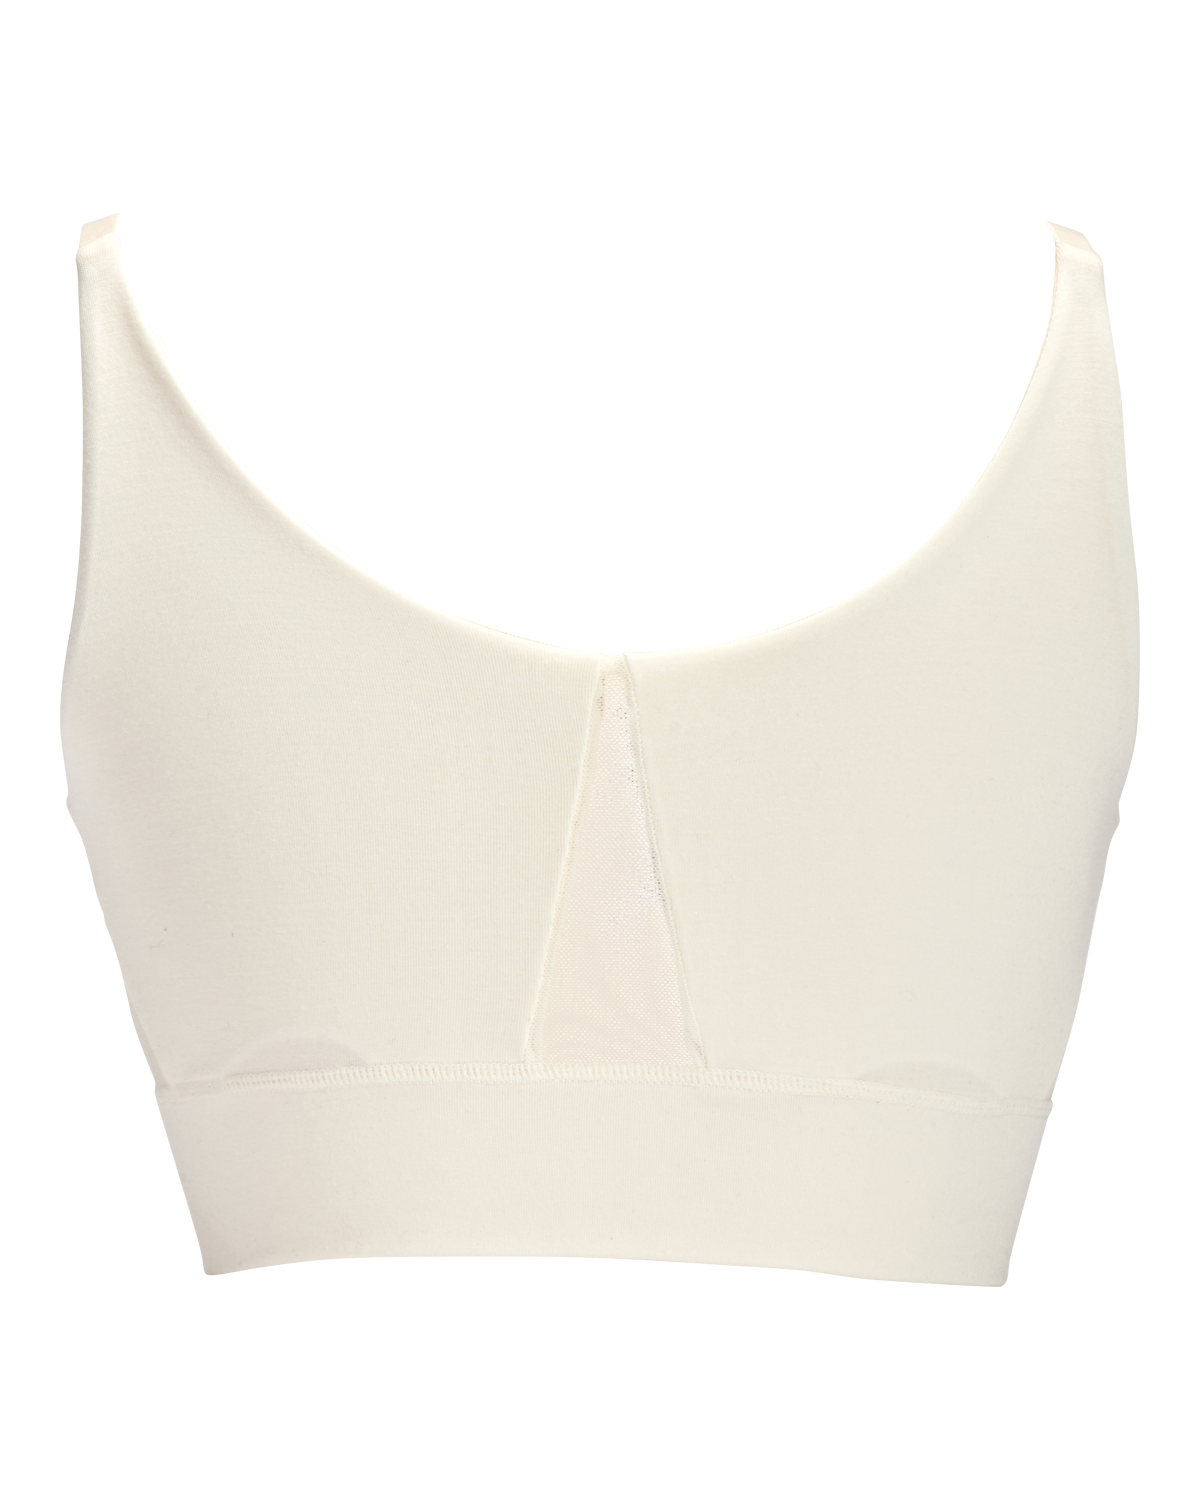 Jamielee Wireless Front Closure Bralette AO-038 – The Full Cup